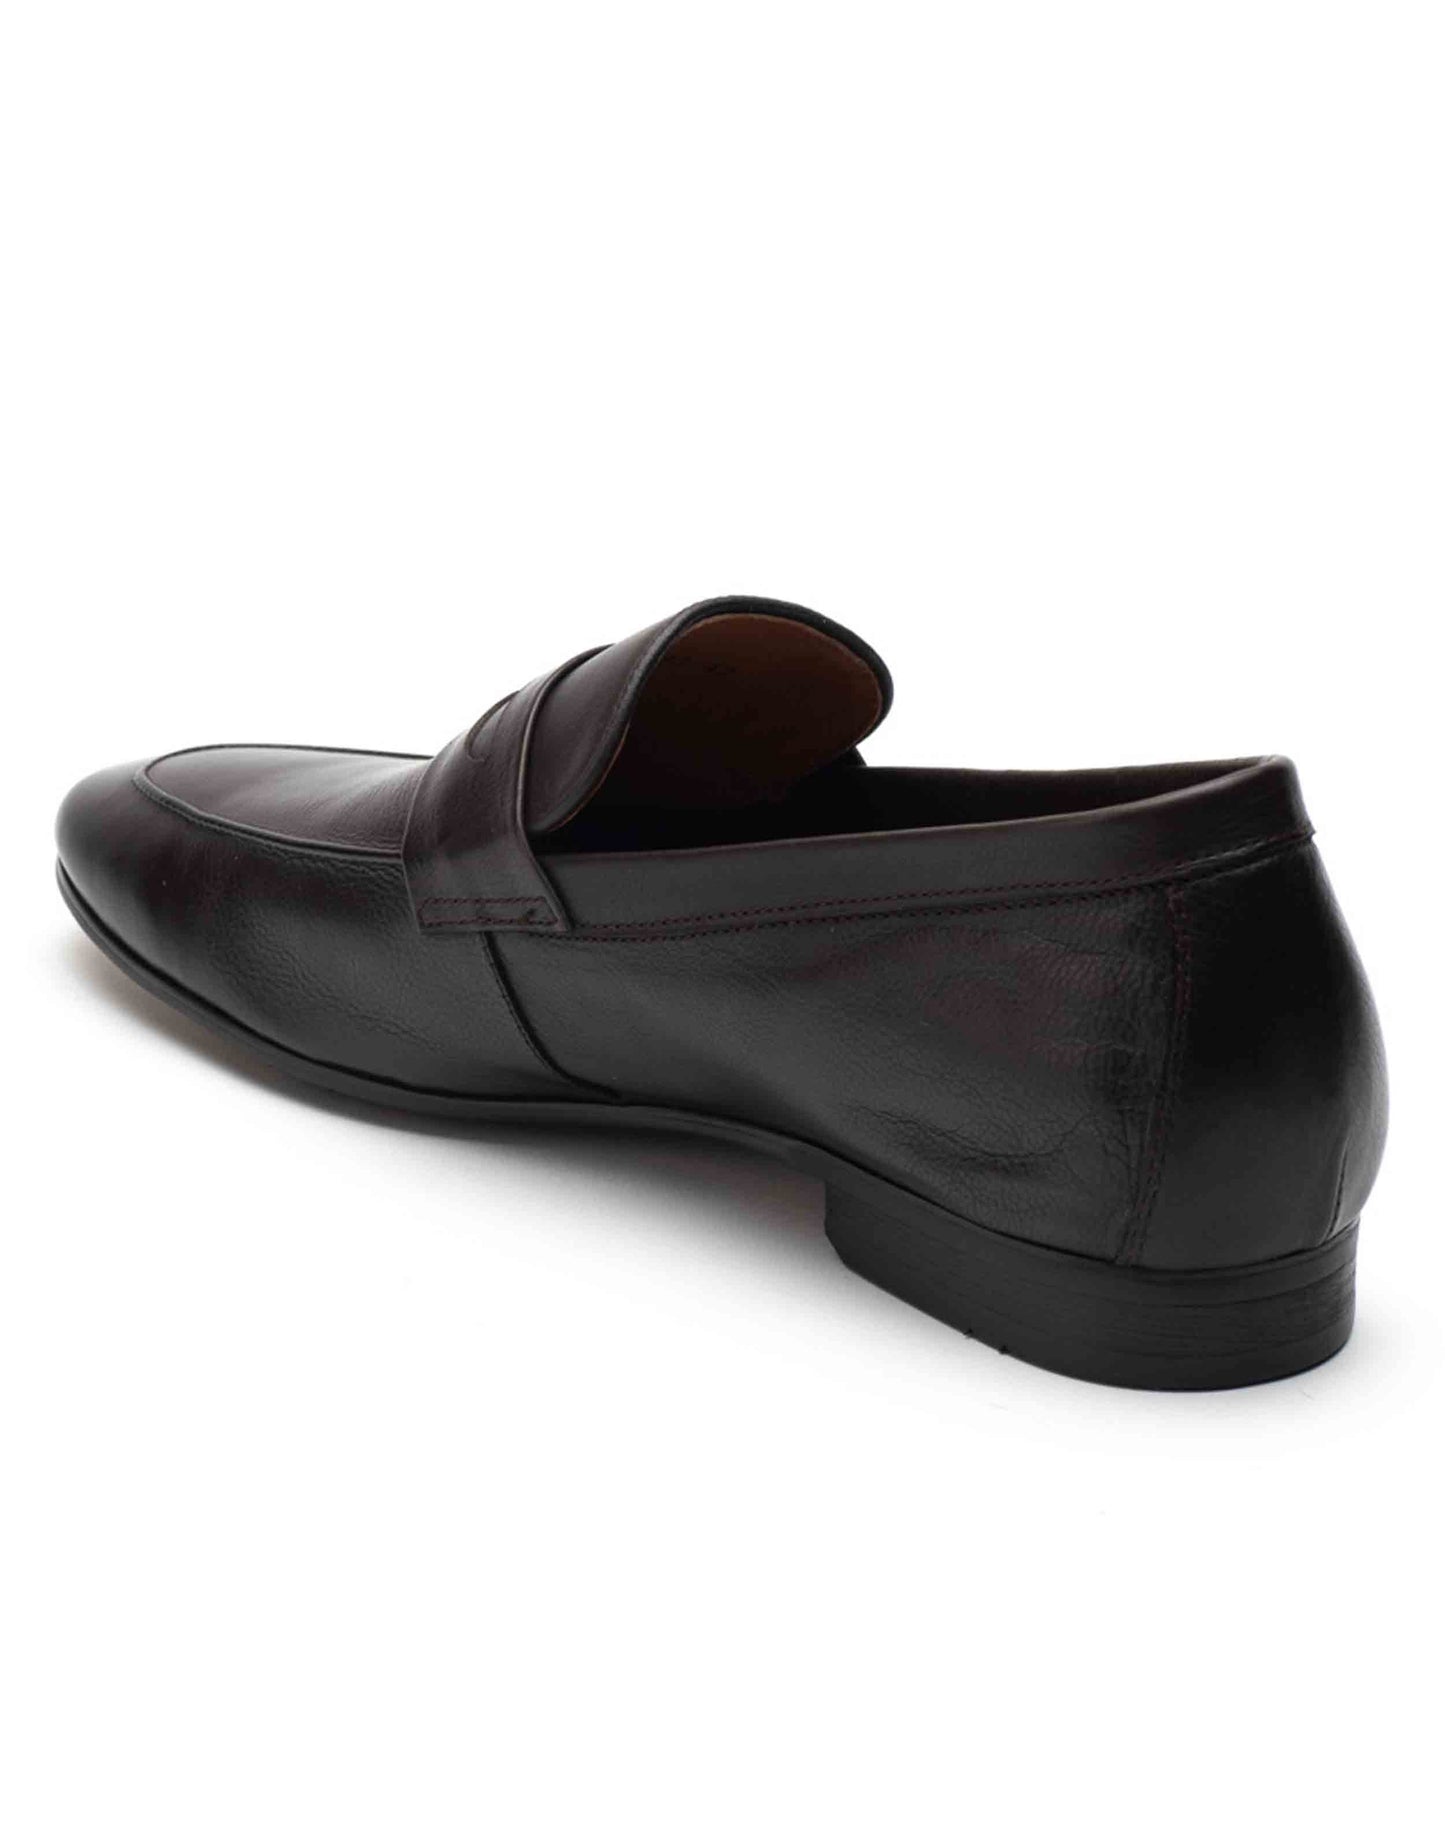 Ascetic Dark Brown Loafers